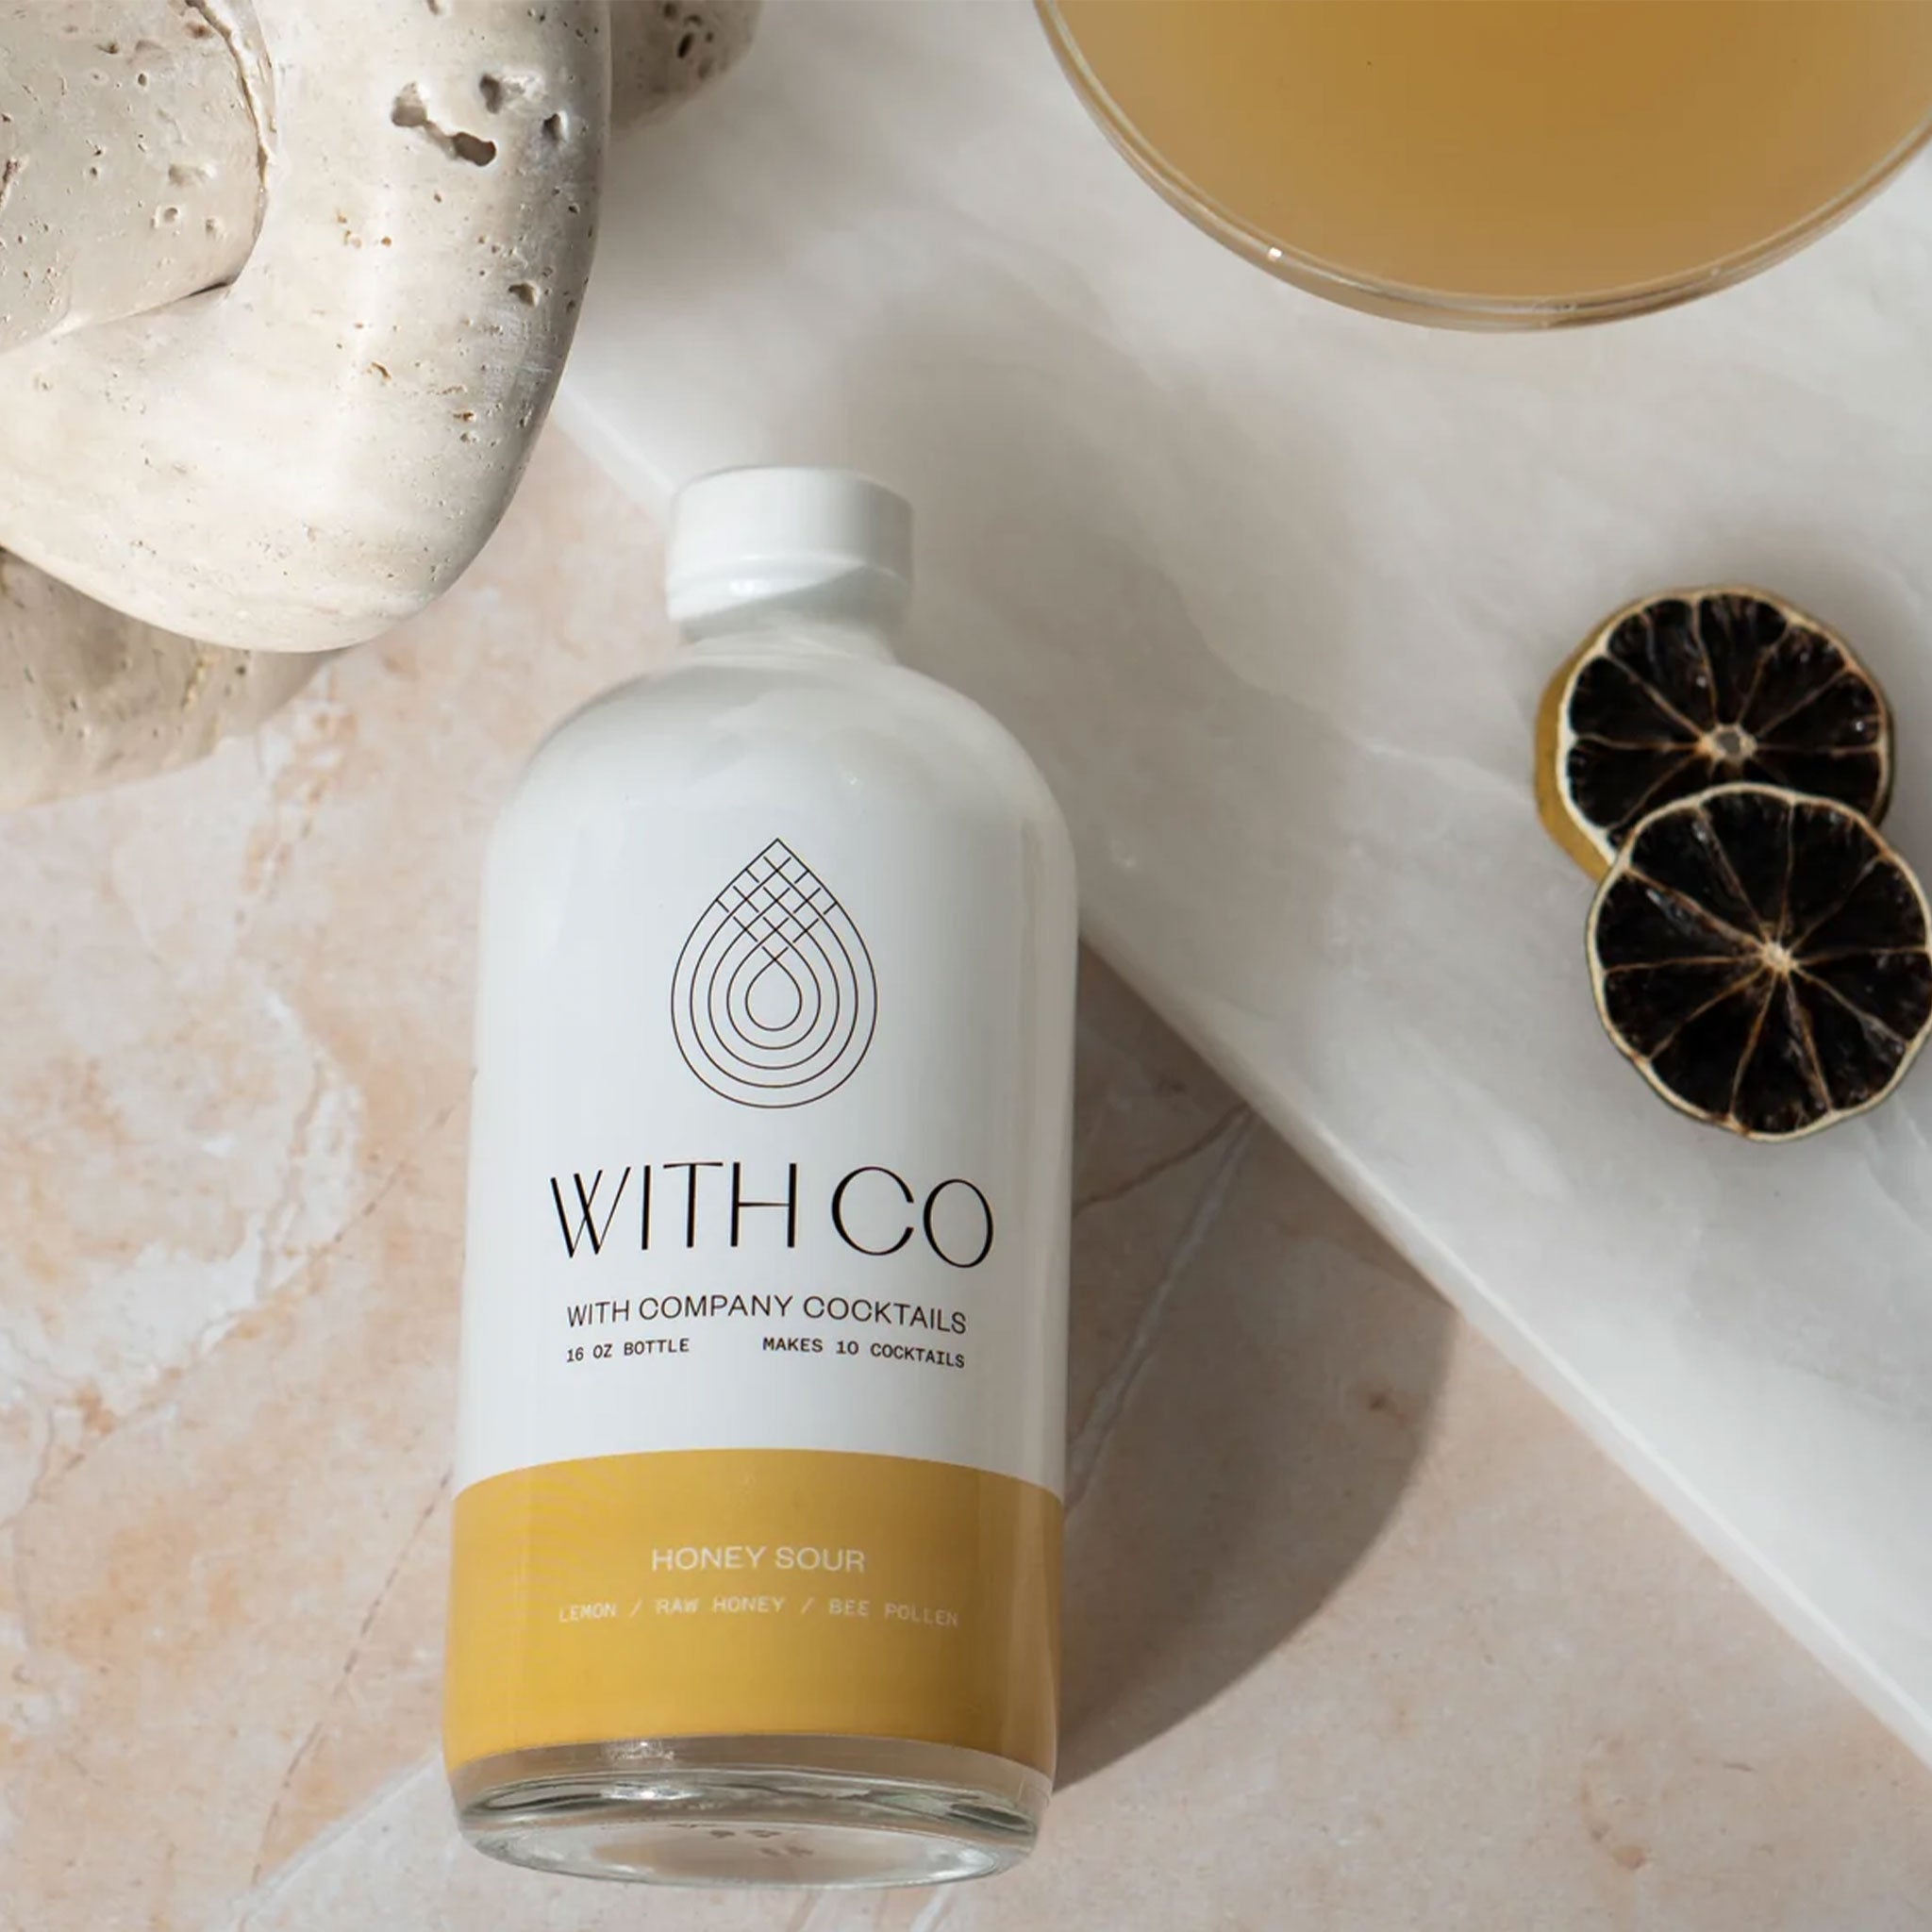 A white bottle of honey sour cocktail mix photographed on a neutral stone backdrop and two dried limes.